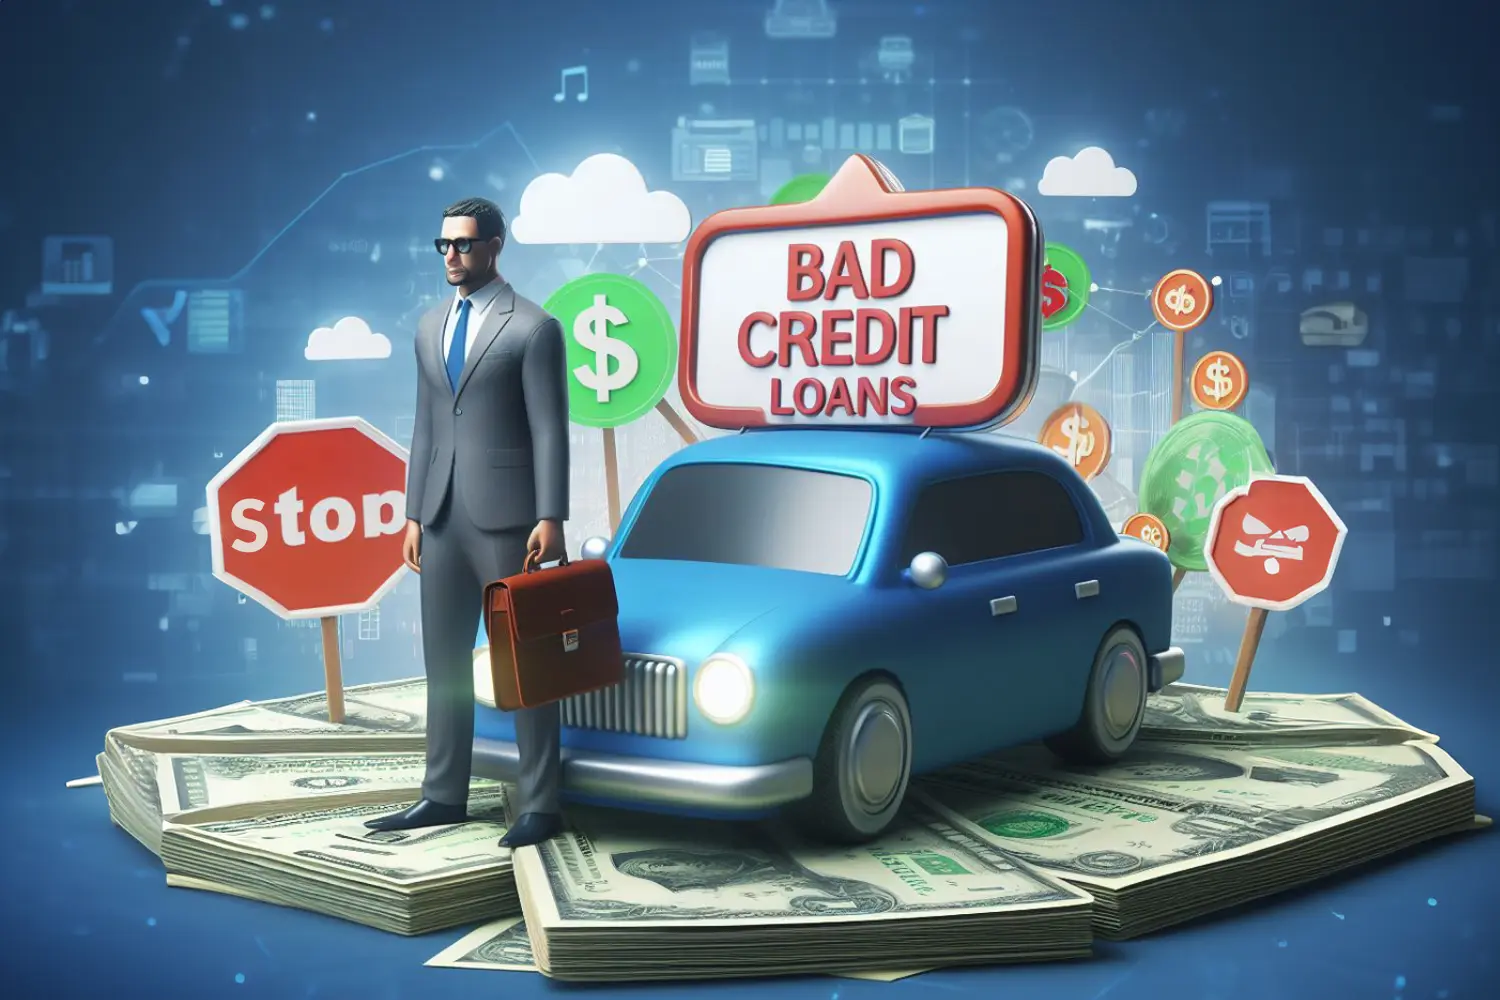 Bad Credit Loans Today: Fast Cash Despite Past Mistakes